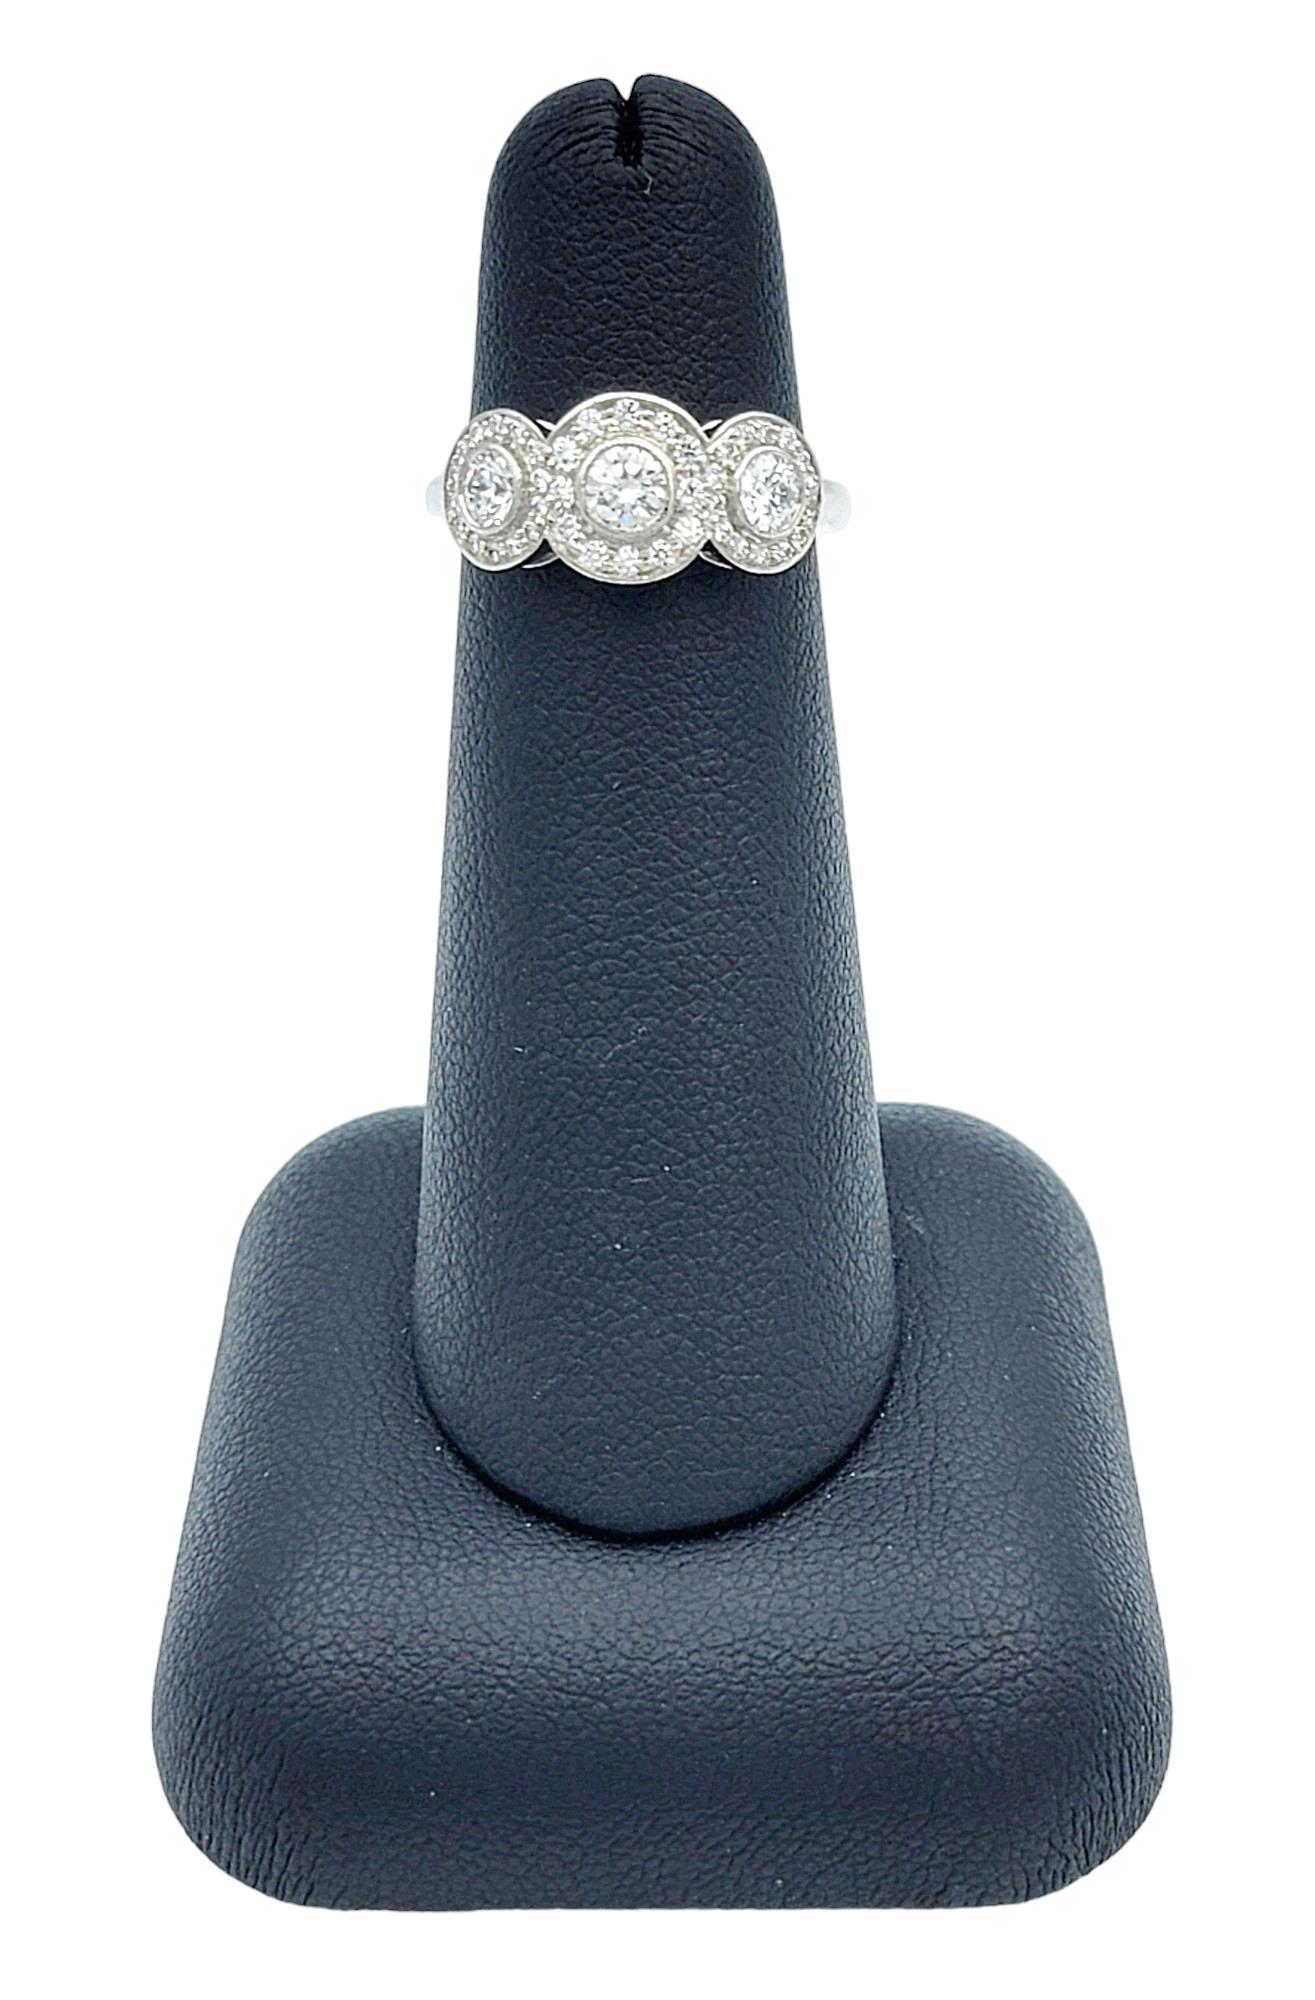 Tiffany & Co. Three Stone Circlet Diamond Halo Ring in Platinum Size 4.75 For Sale 2